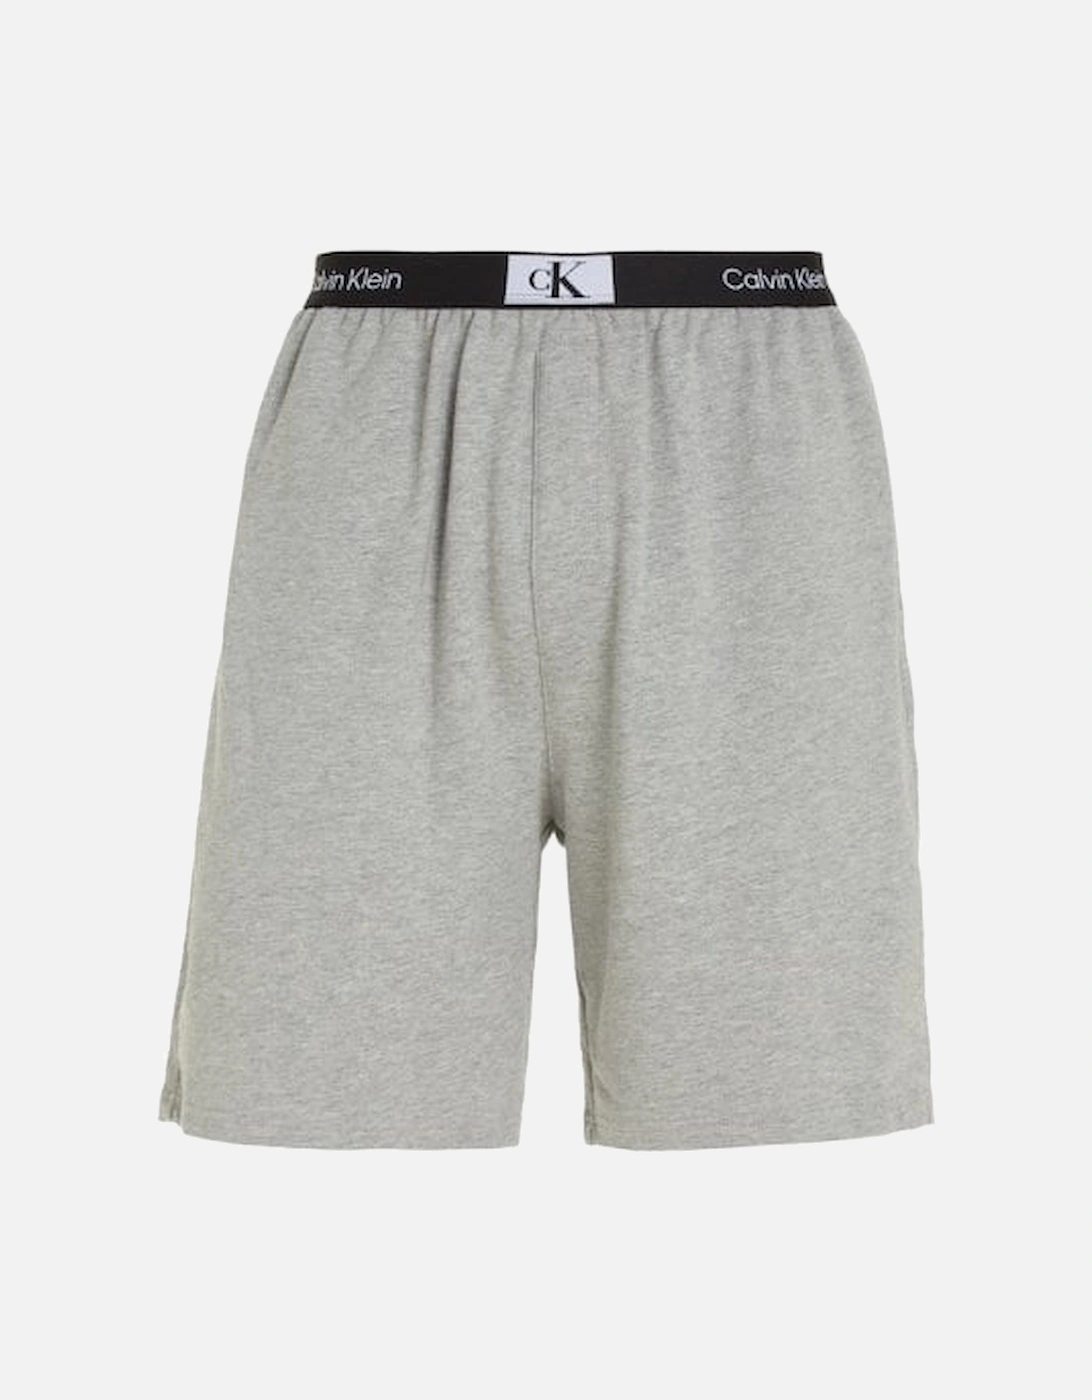 CK 96 French Terry Lounge Shorts, Grey Heather, 7 of 6